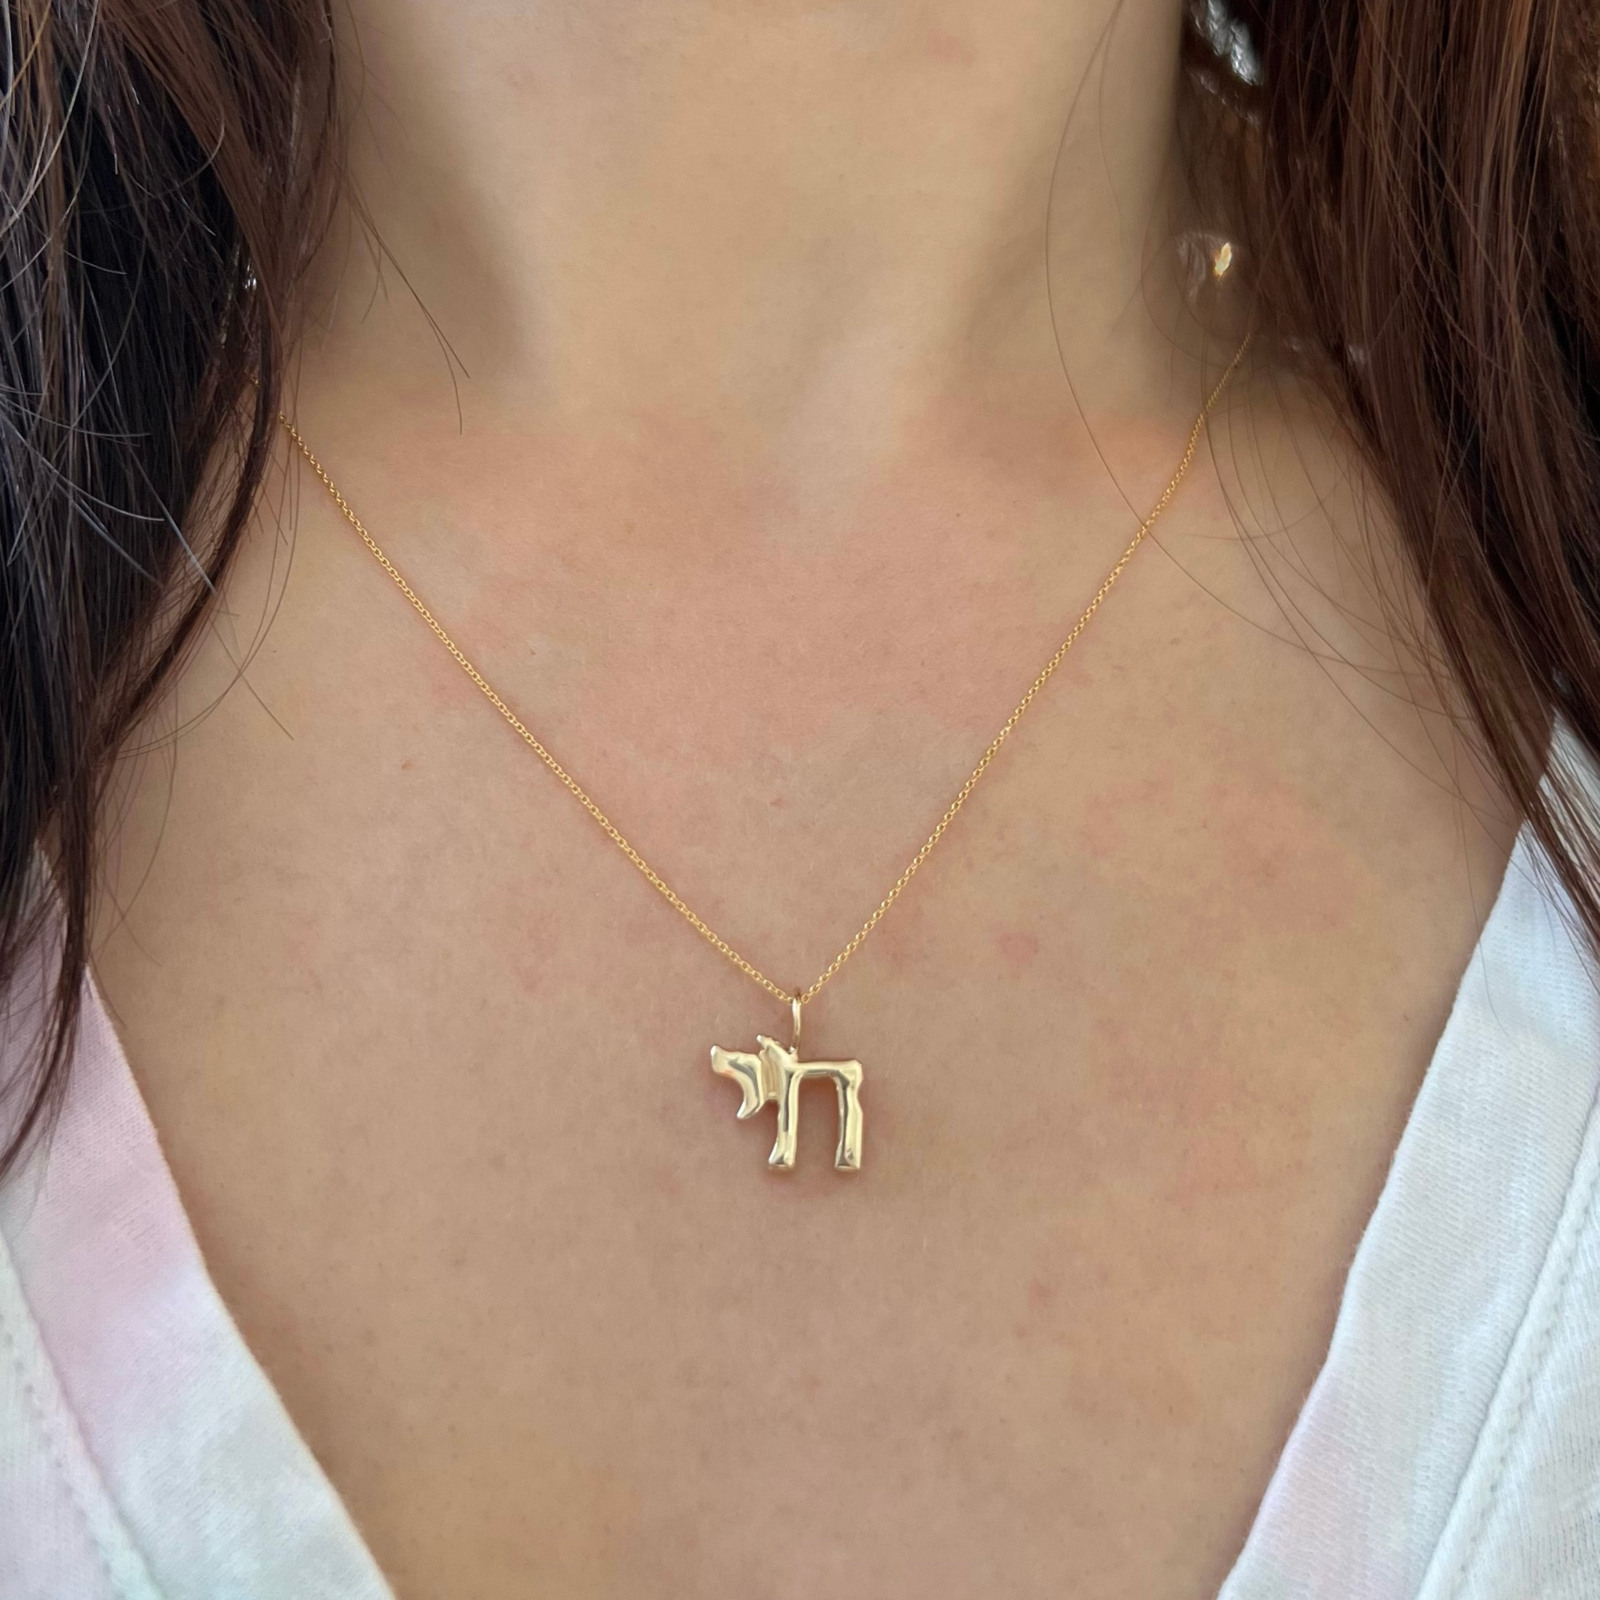 wearing the 14k yellow gold chai symbol charm necklace